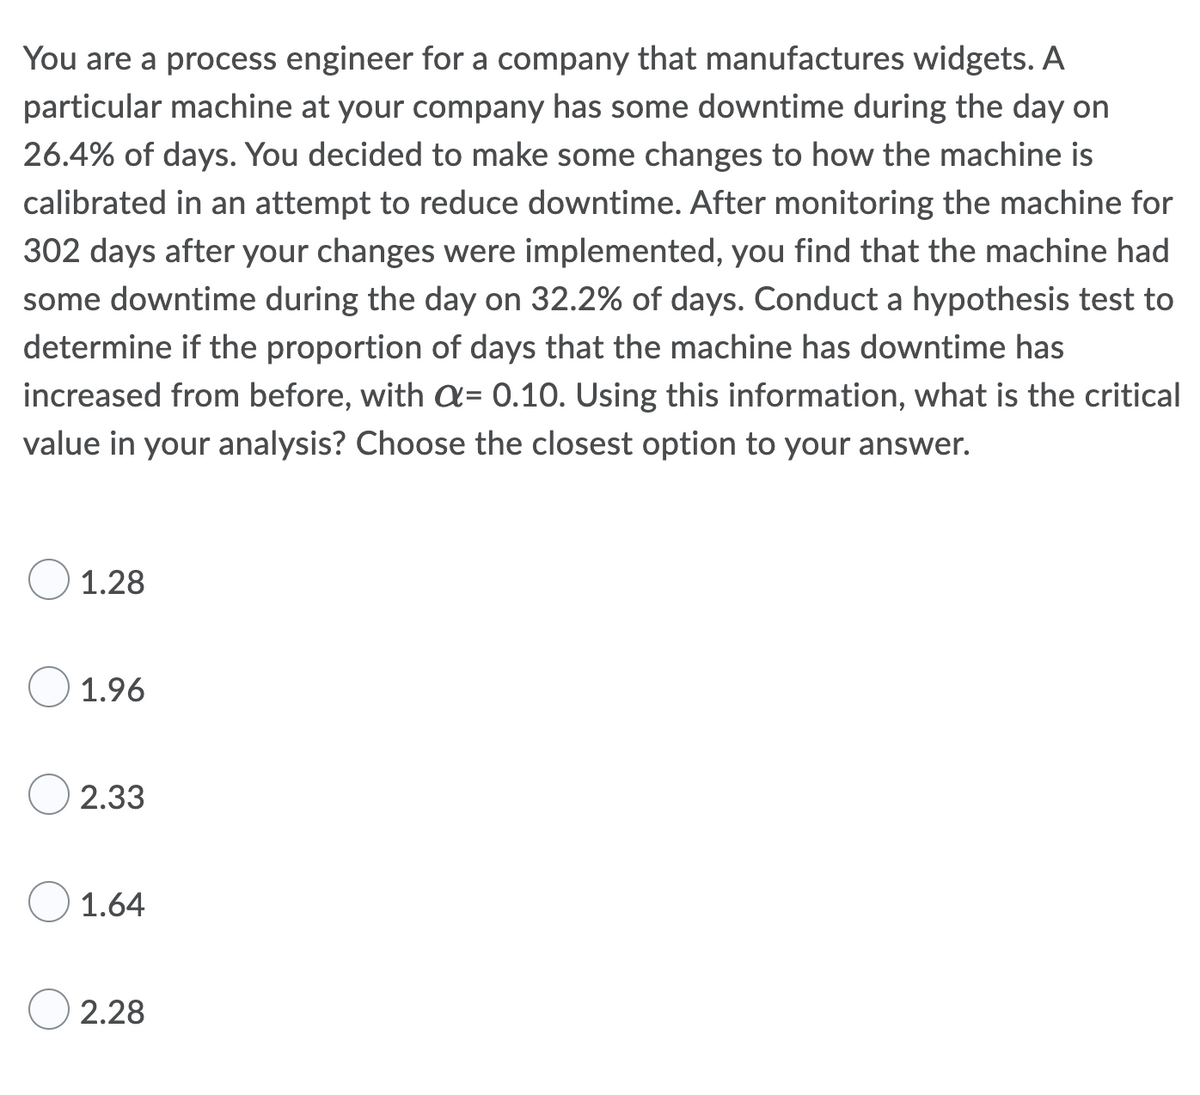 You are a process engineer for a company that manufactures widgets. A
particular machine at your company has some downtime during the day on
26.4% of days. You decided to make some changes to how the machine is
calibrated in an attempt to reduce downtime. After monitoring the machine for
302 days after your changes were implemented, you find that the machine had
some downtime during the day on 32.2% of days. Conduct a hypothesis test to
determine if the proportion of days that the machine has downtime has
increased from before, with a= 0.10. Using this information, what is the critical
value in your analysis? Choose the closest option to your answer.
1.28
1.96
2.33
1.64
2.28